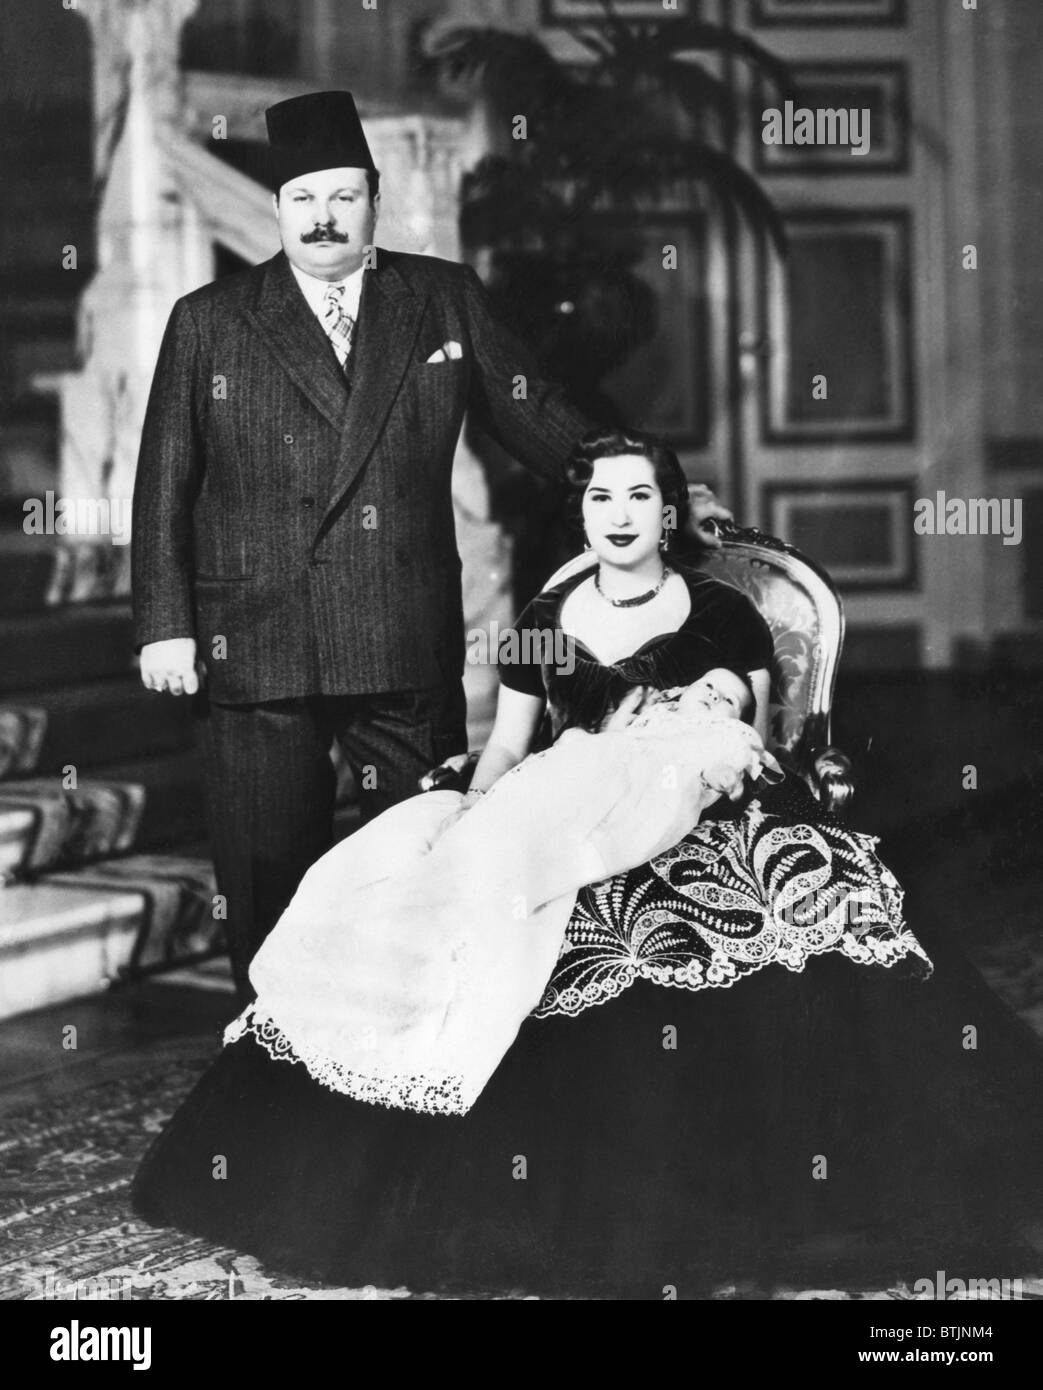 King Farouk of Egypt (1920-1965), Queen Narriman (holding Prince Ahmed Fouad), Cairo, Egypt, March 29, 1952. Stock Photo